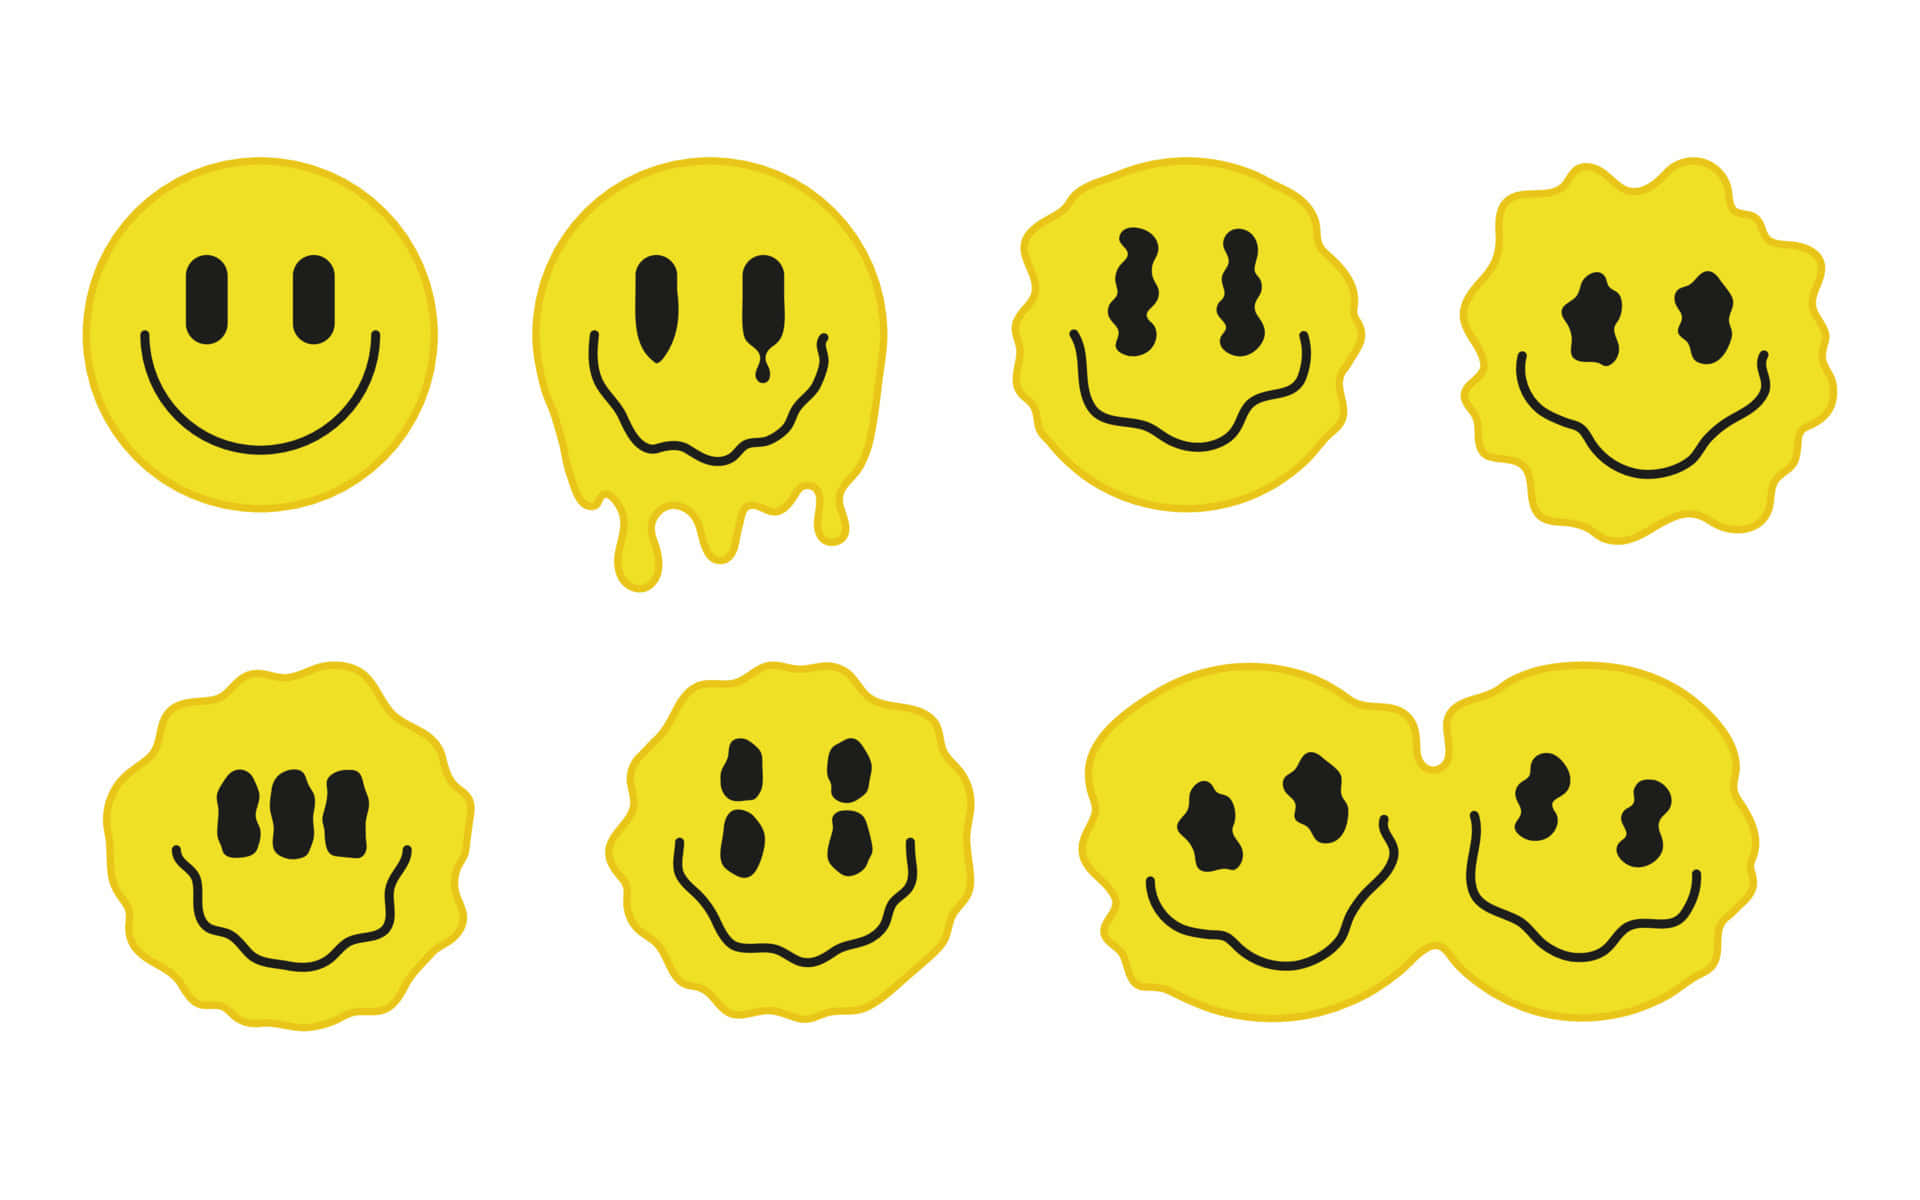 Psychedelic Surreal Aesthetic Trippy Smiley Face Wallpaper